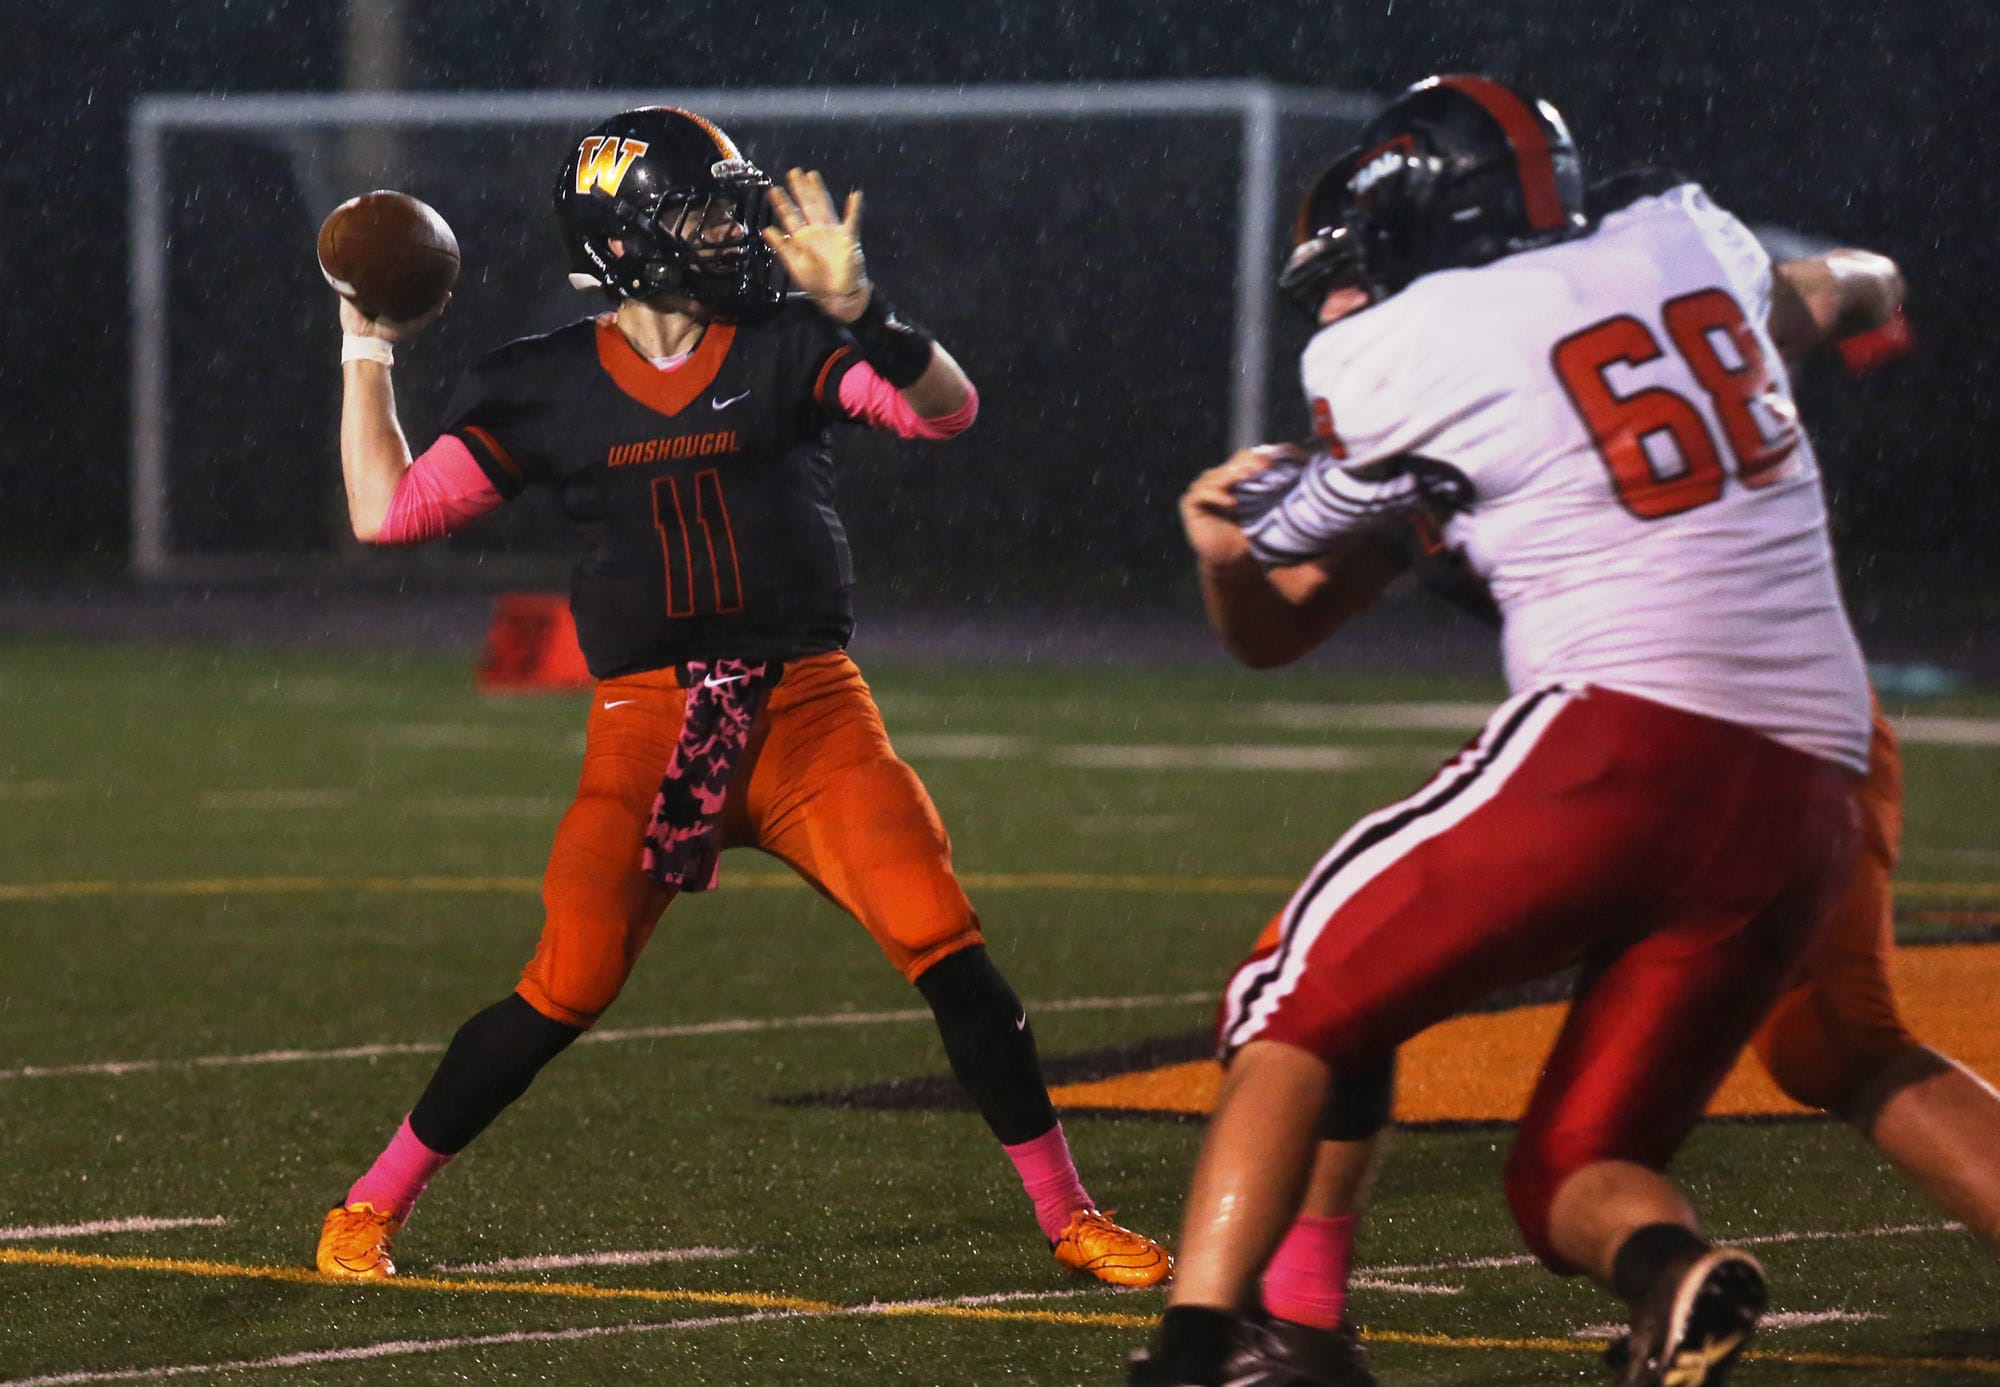 Washougal Panther Ryan Stevens throws the ball in a game against the RA Long Lumberjacks at Washougal Friday October 21, 2016.